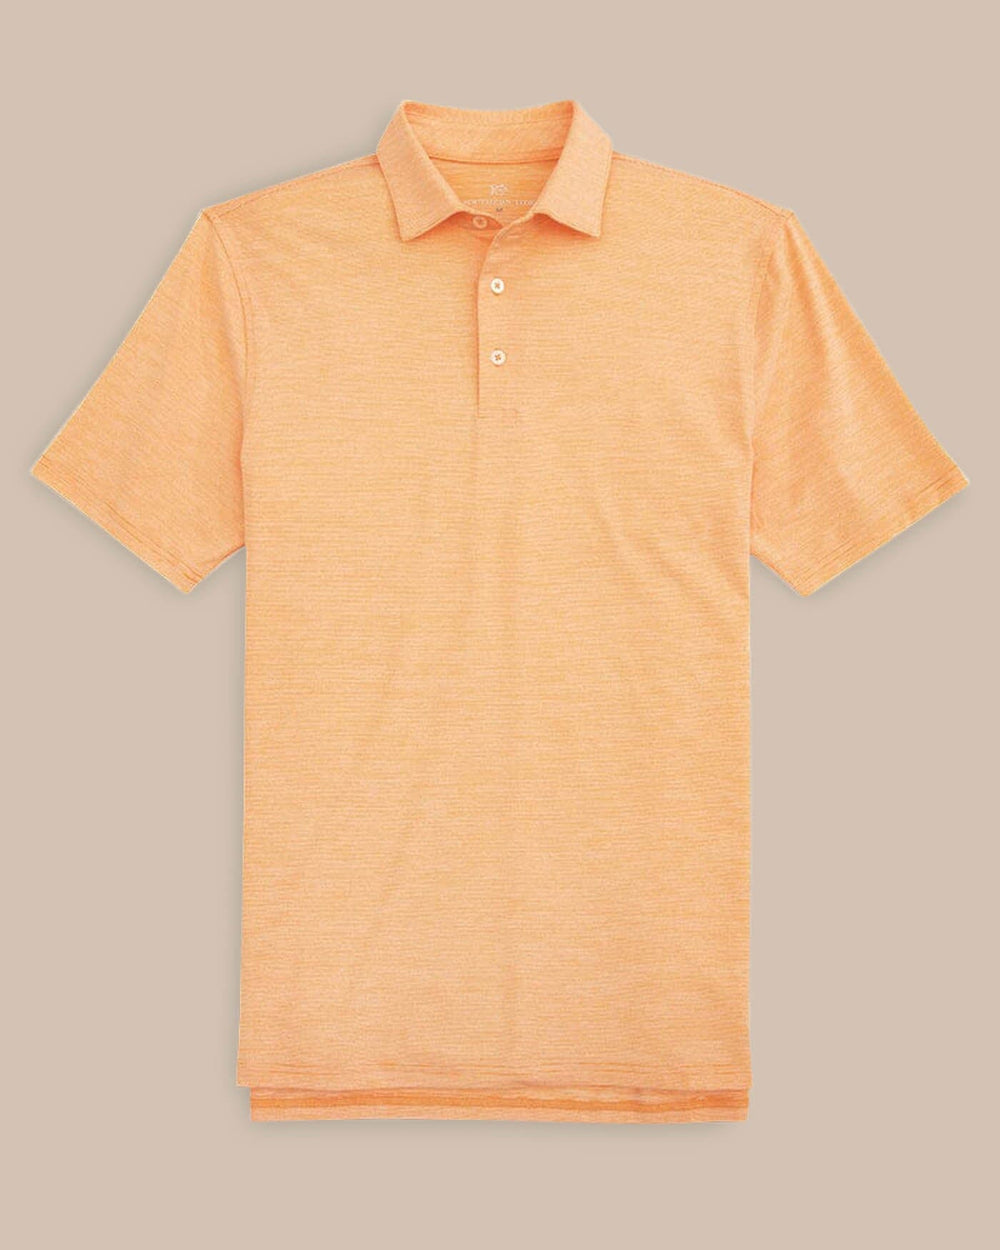 The front view of the Team Colors Driver Spacedye Polo Shirt by Southern Tide - Rocky Top Orange